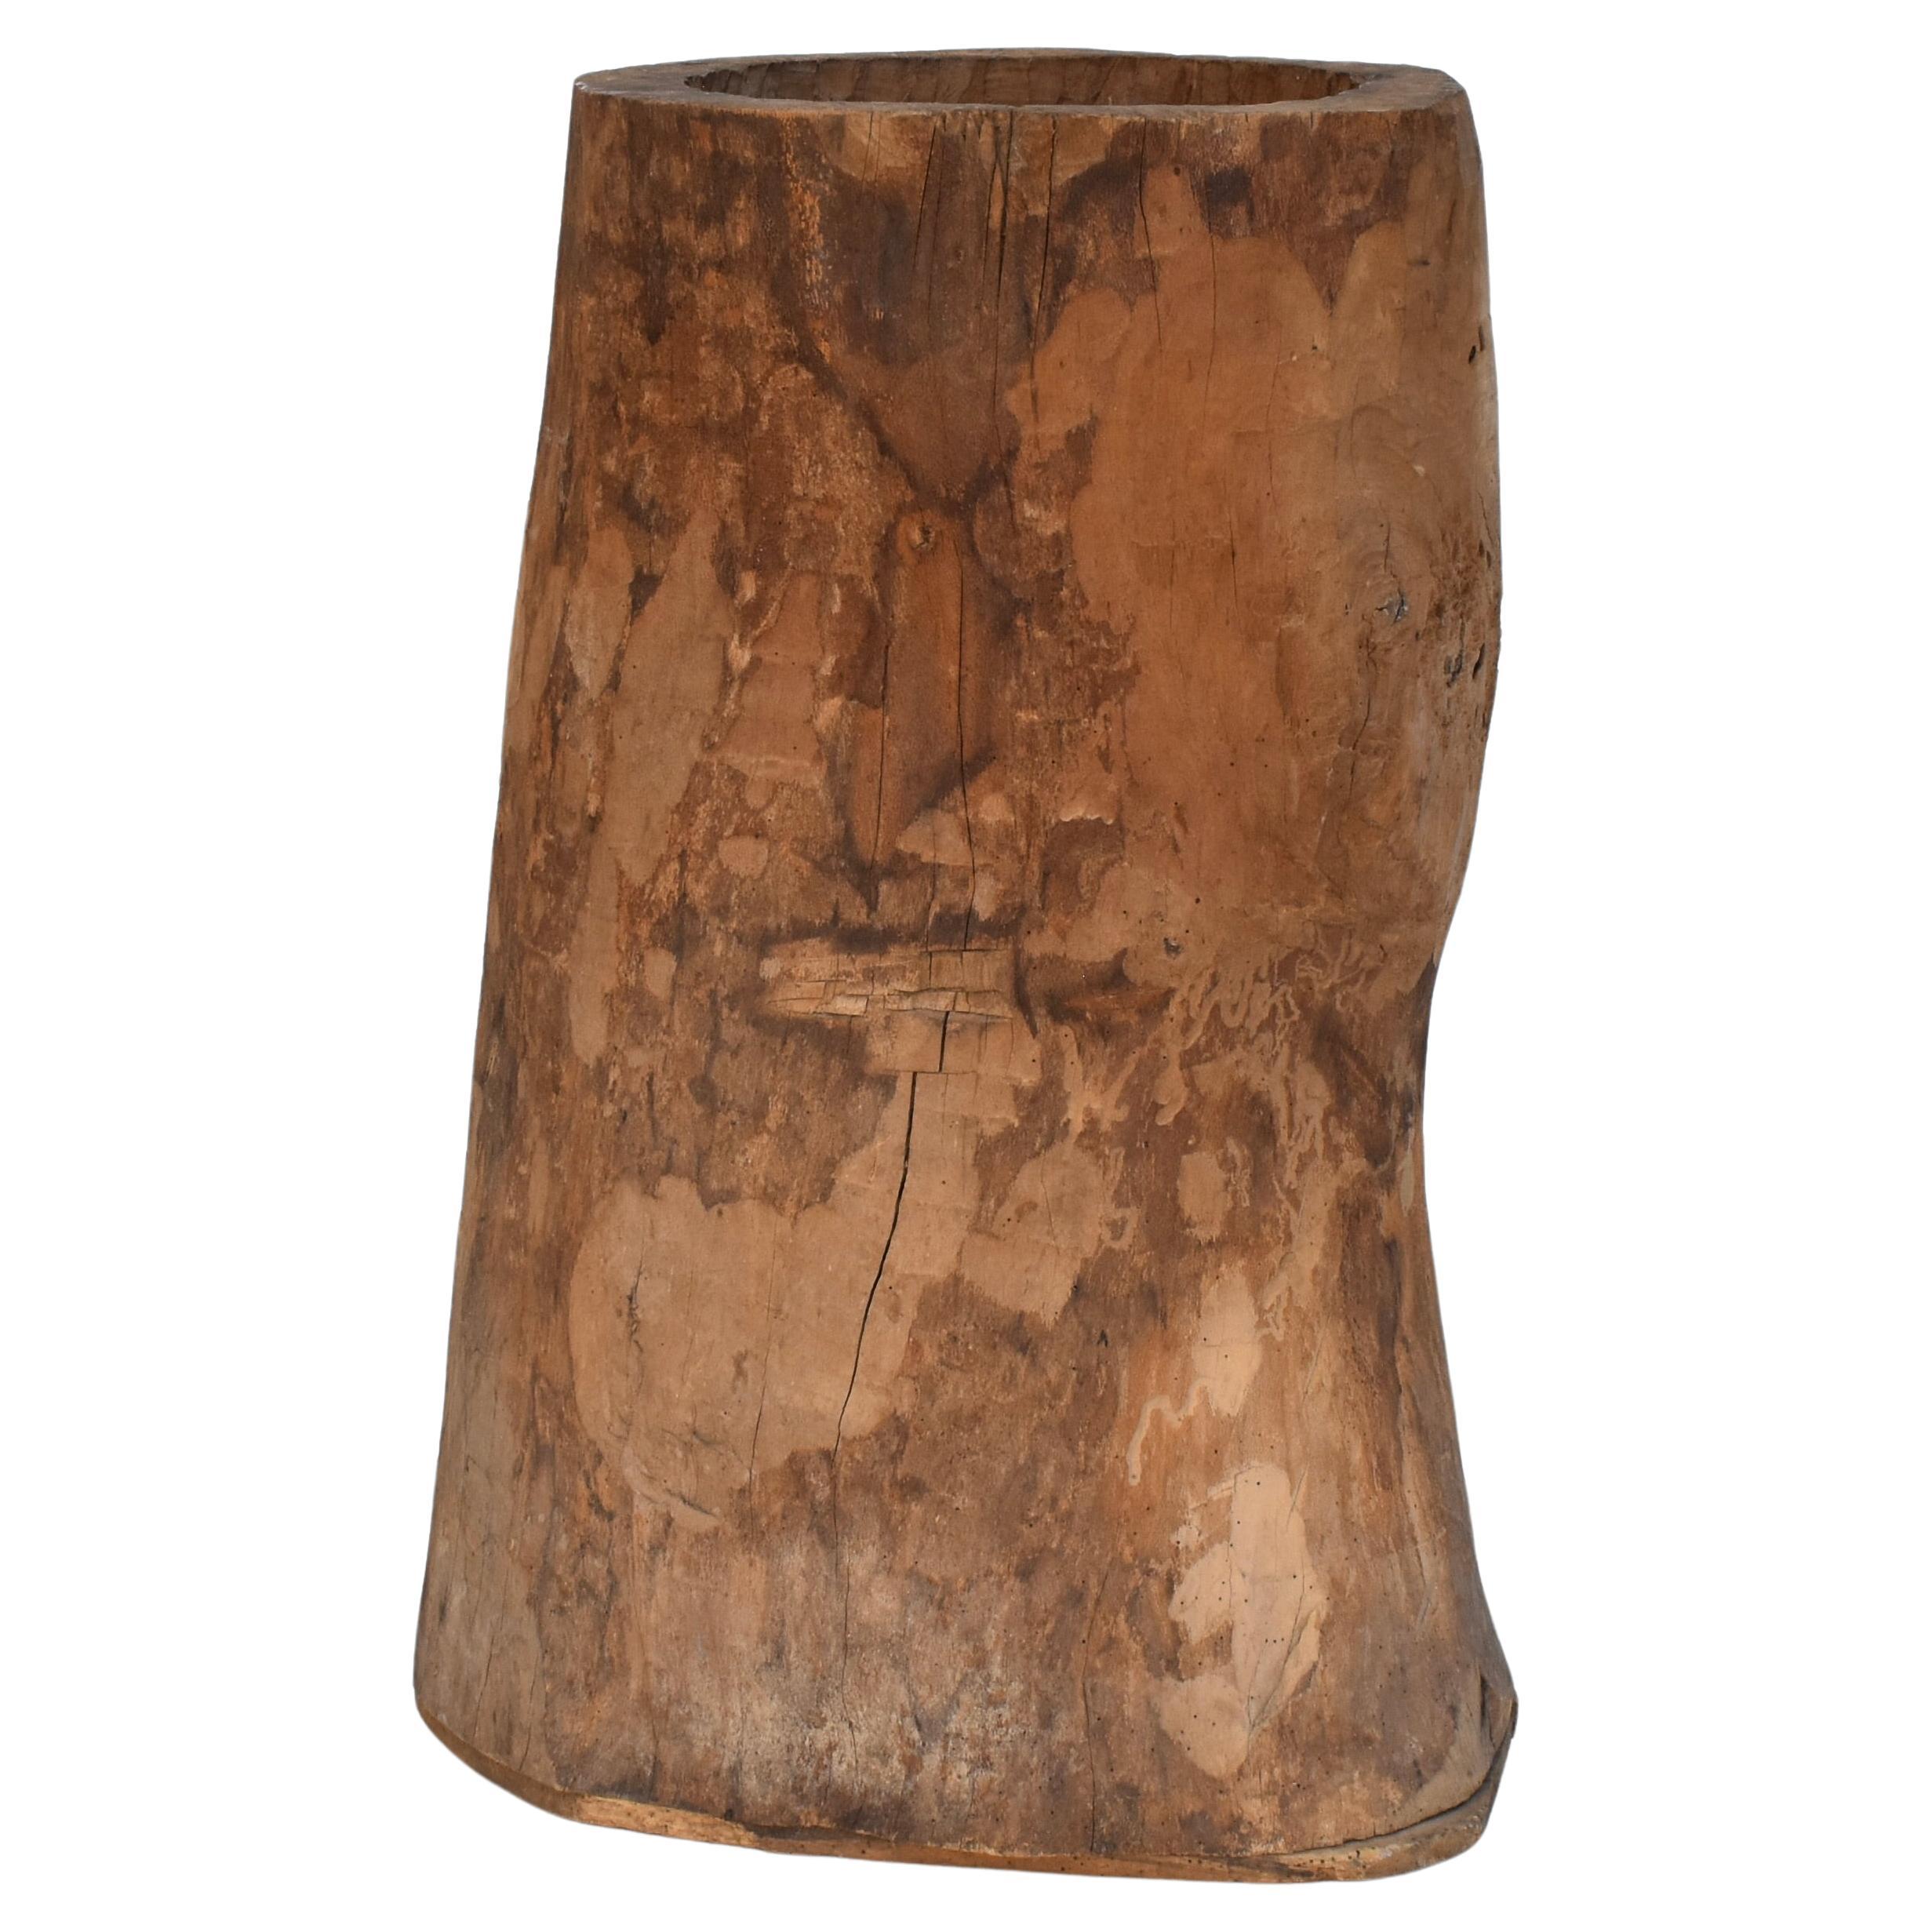 French Antique Hollowed Tree Trunk Wooden Planter Vessel, Late 19th C. France For Sale 2